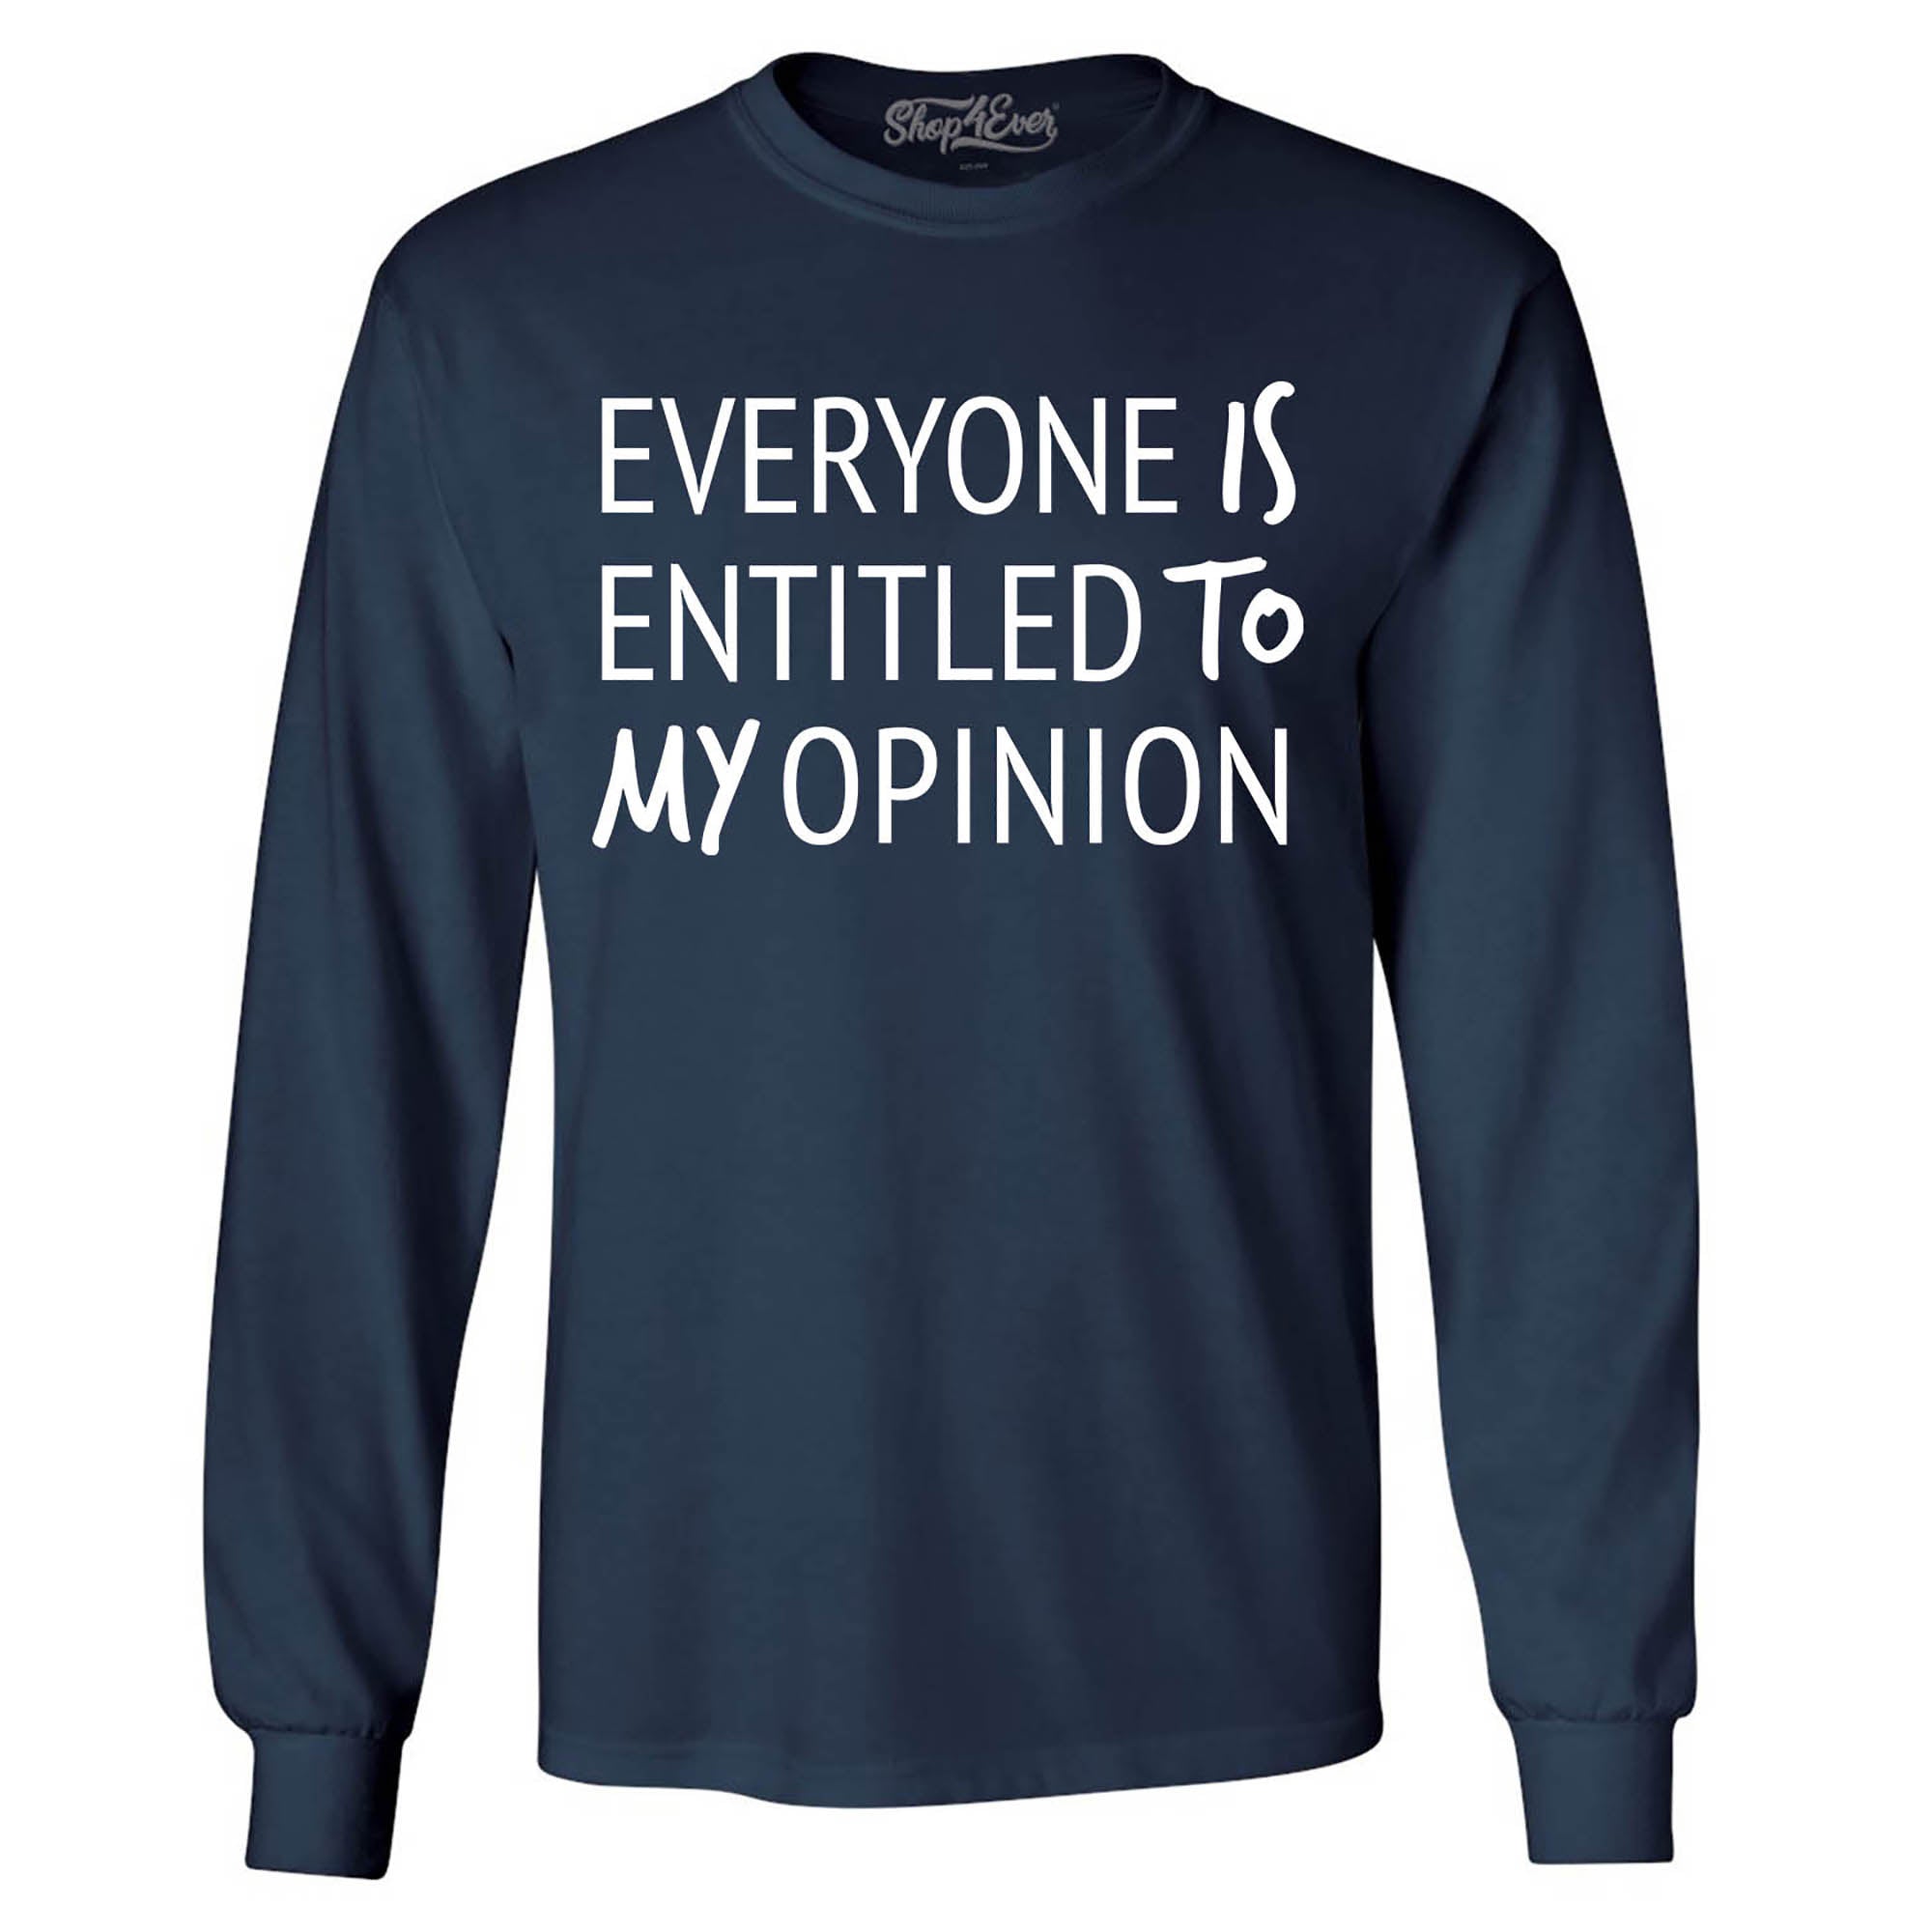 Everyone is Entitled to My Opinion Funny Sarcastic Long Sleeve Shirt